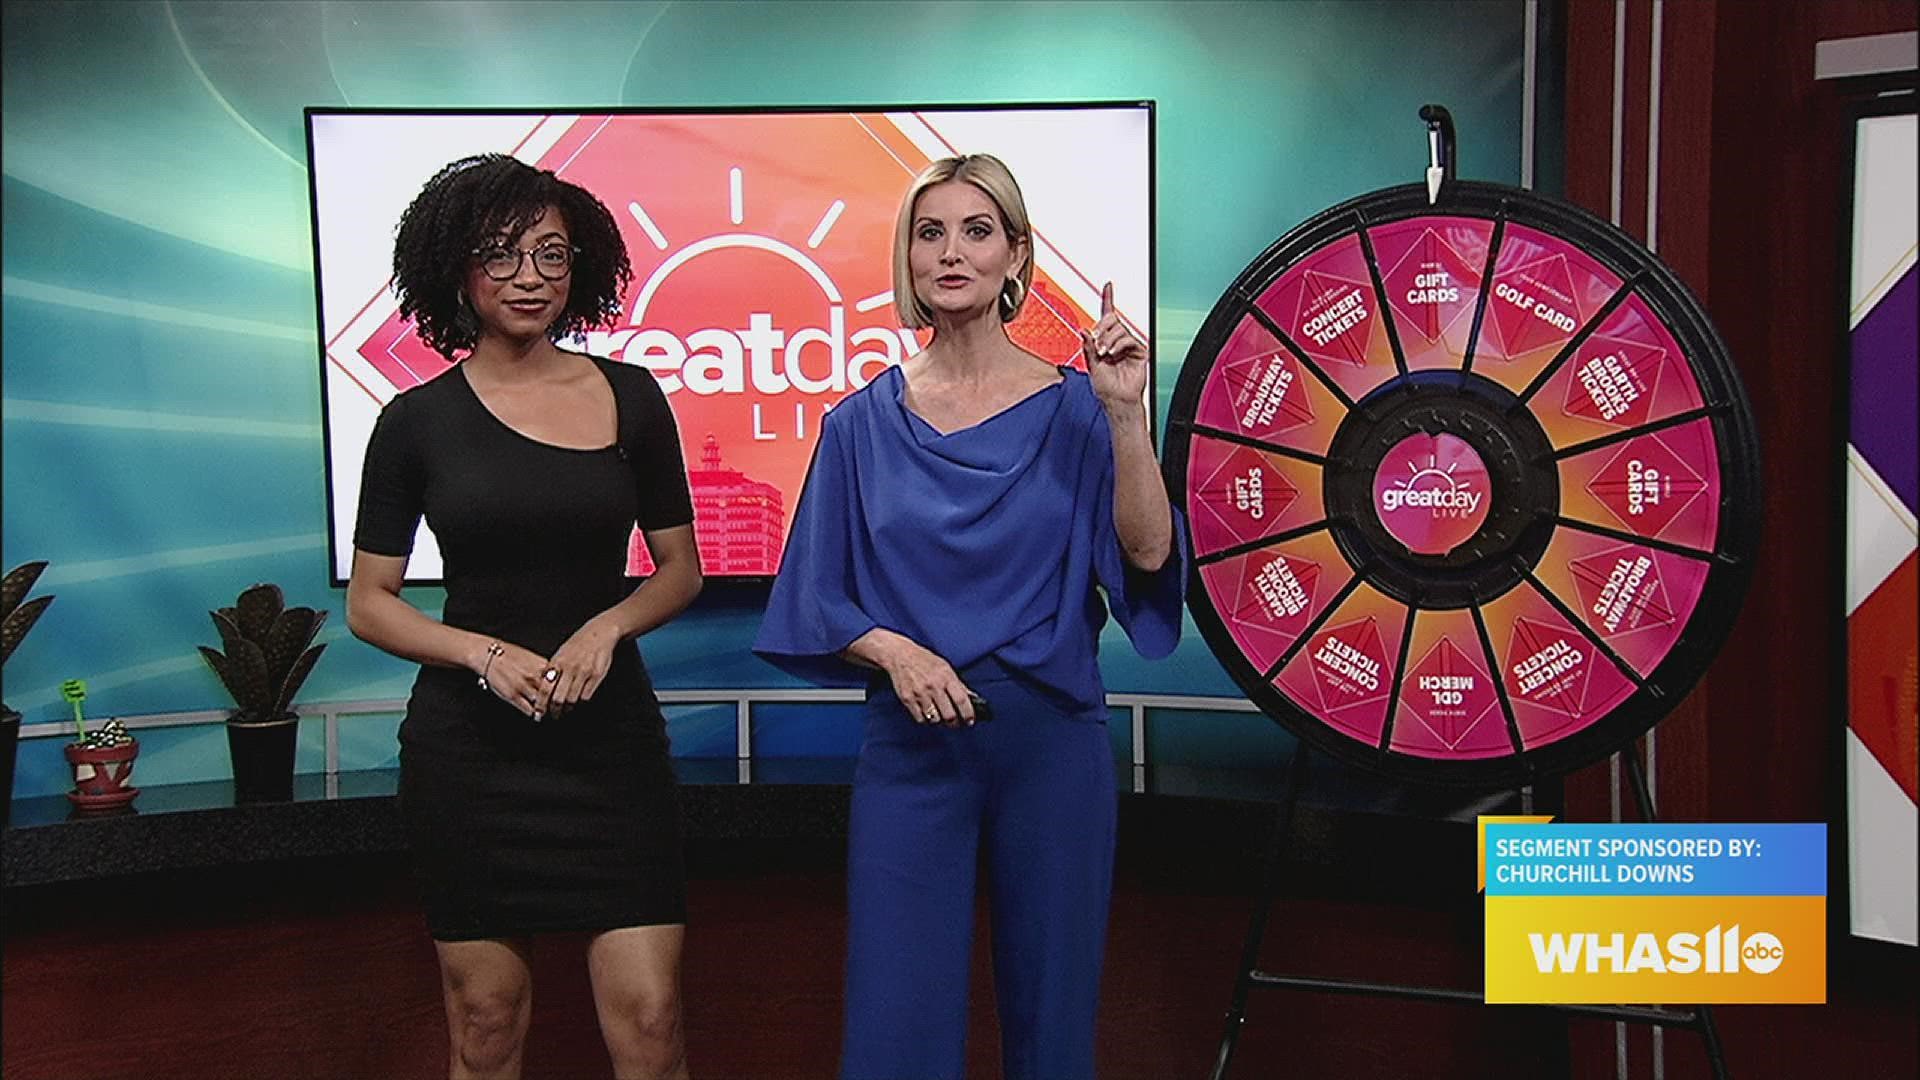 Spin to win with the Great Day Live Prize Wheel Sweepstakes!